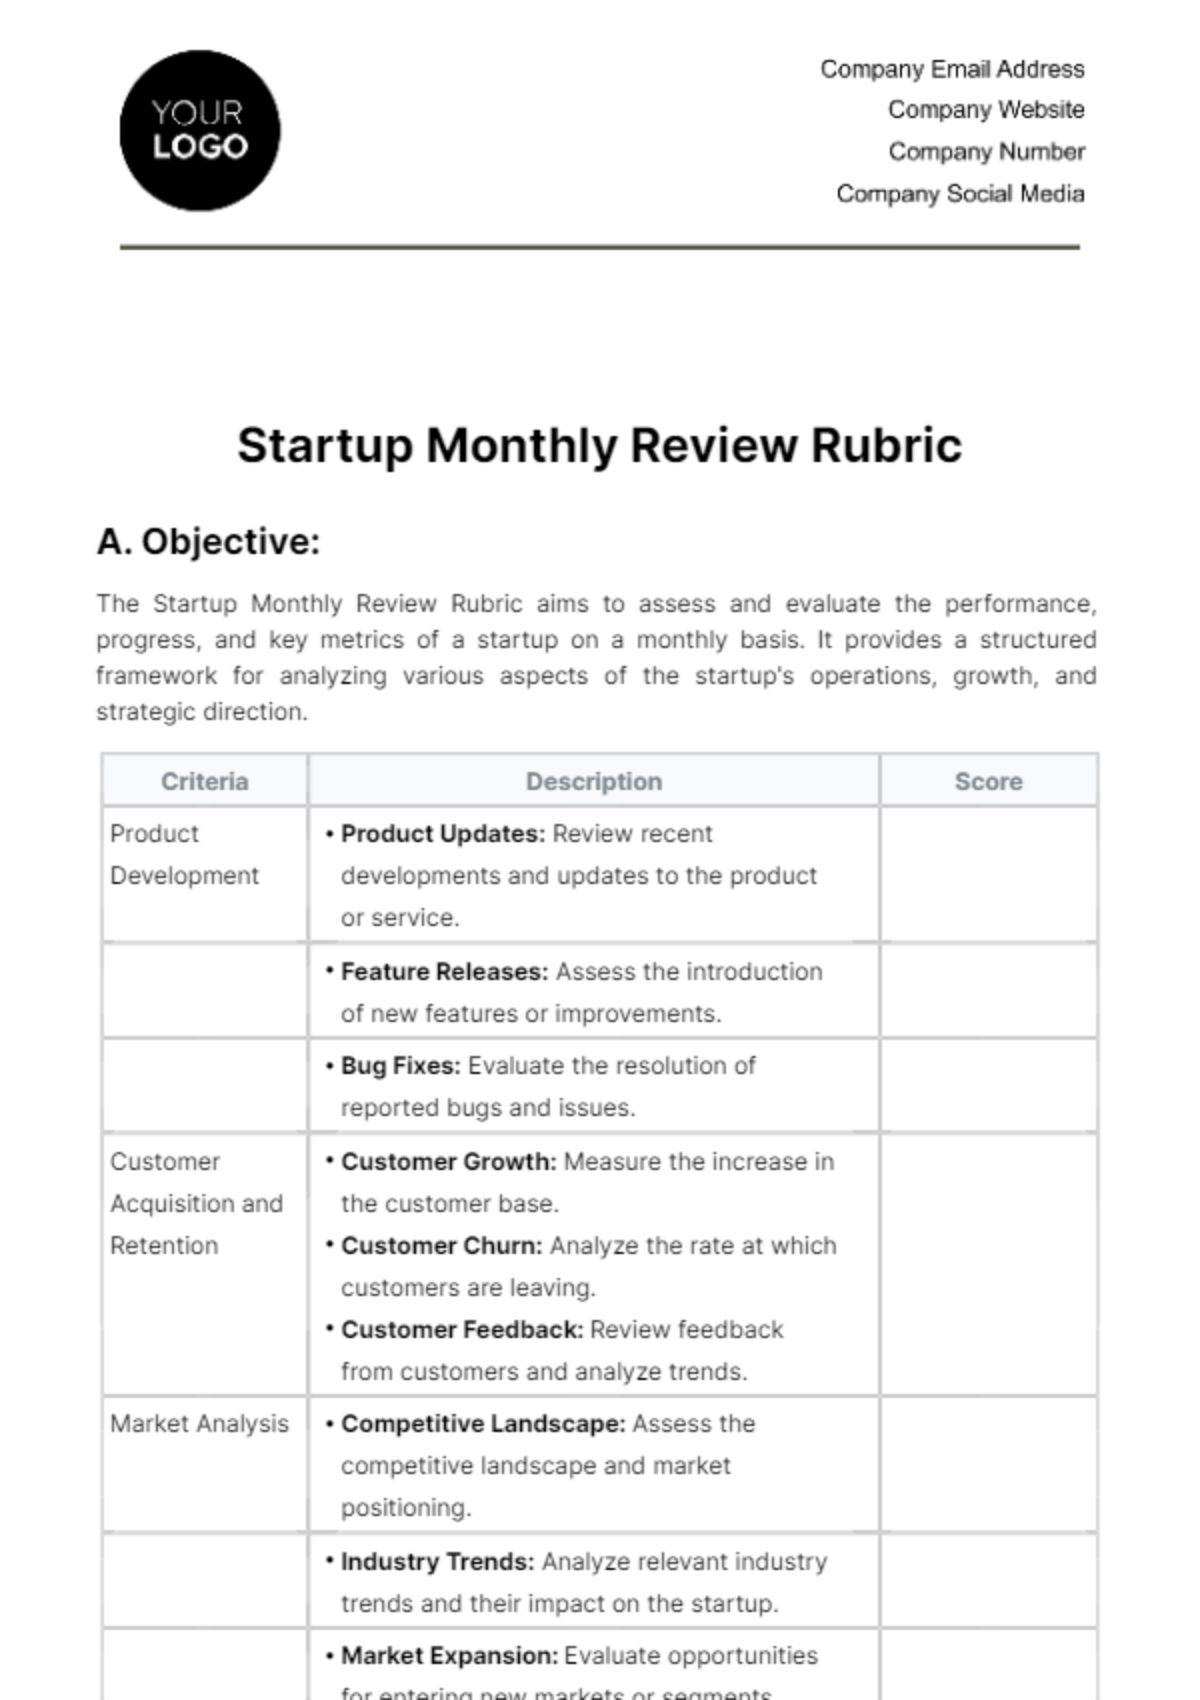 Free Startup Monthly Review Rubric Template